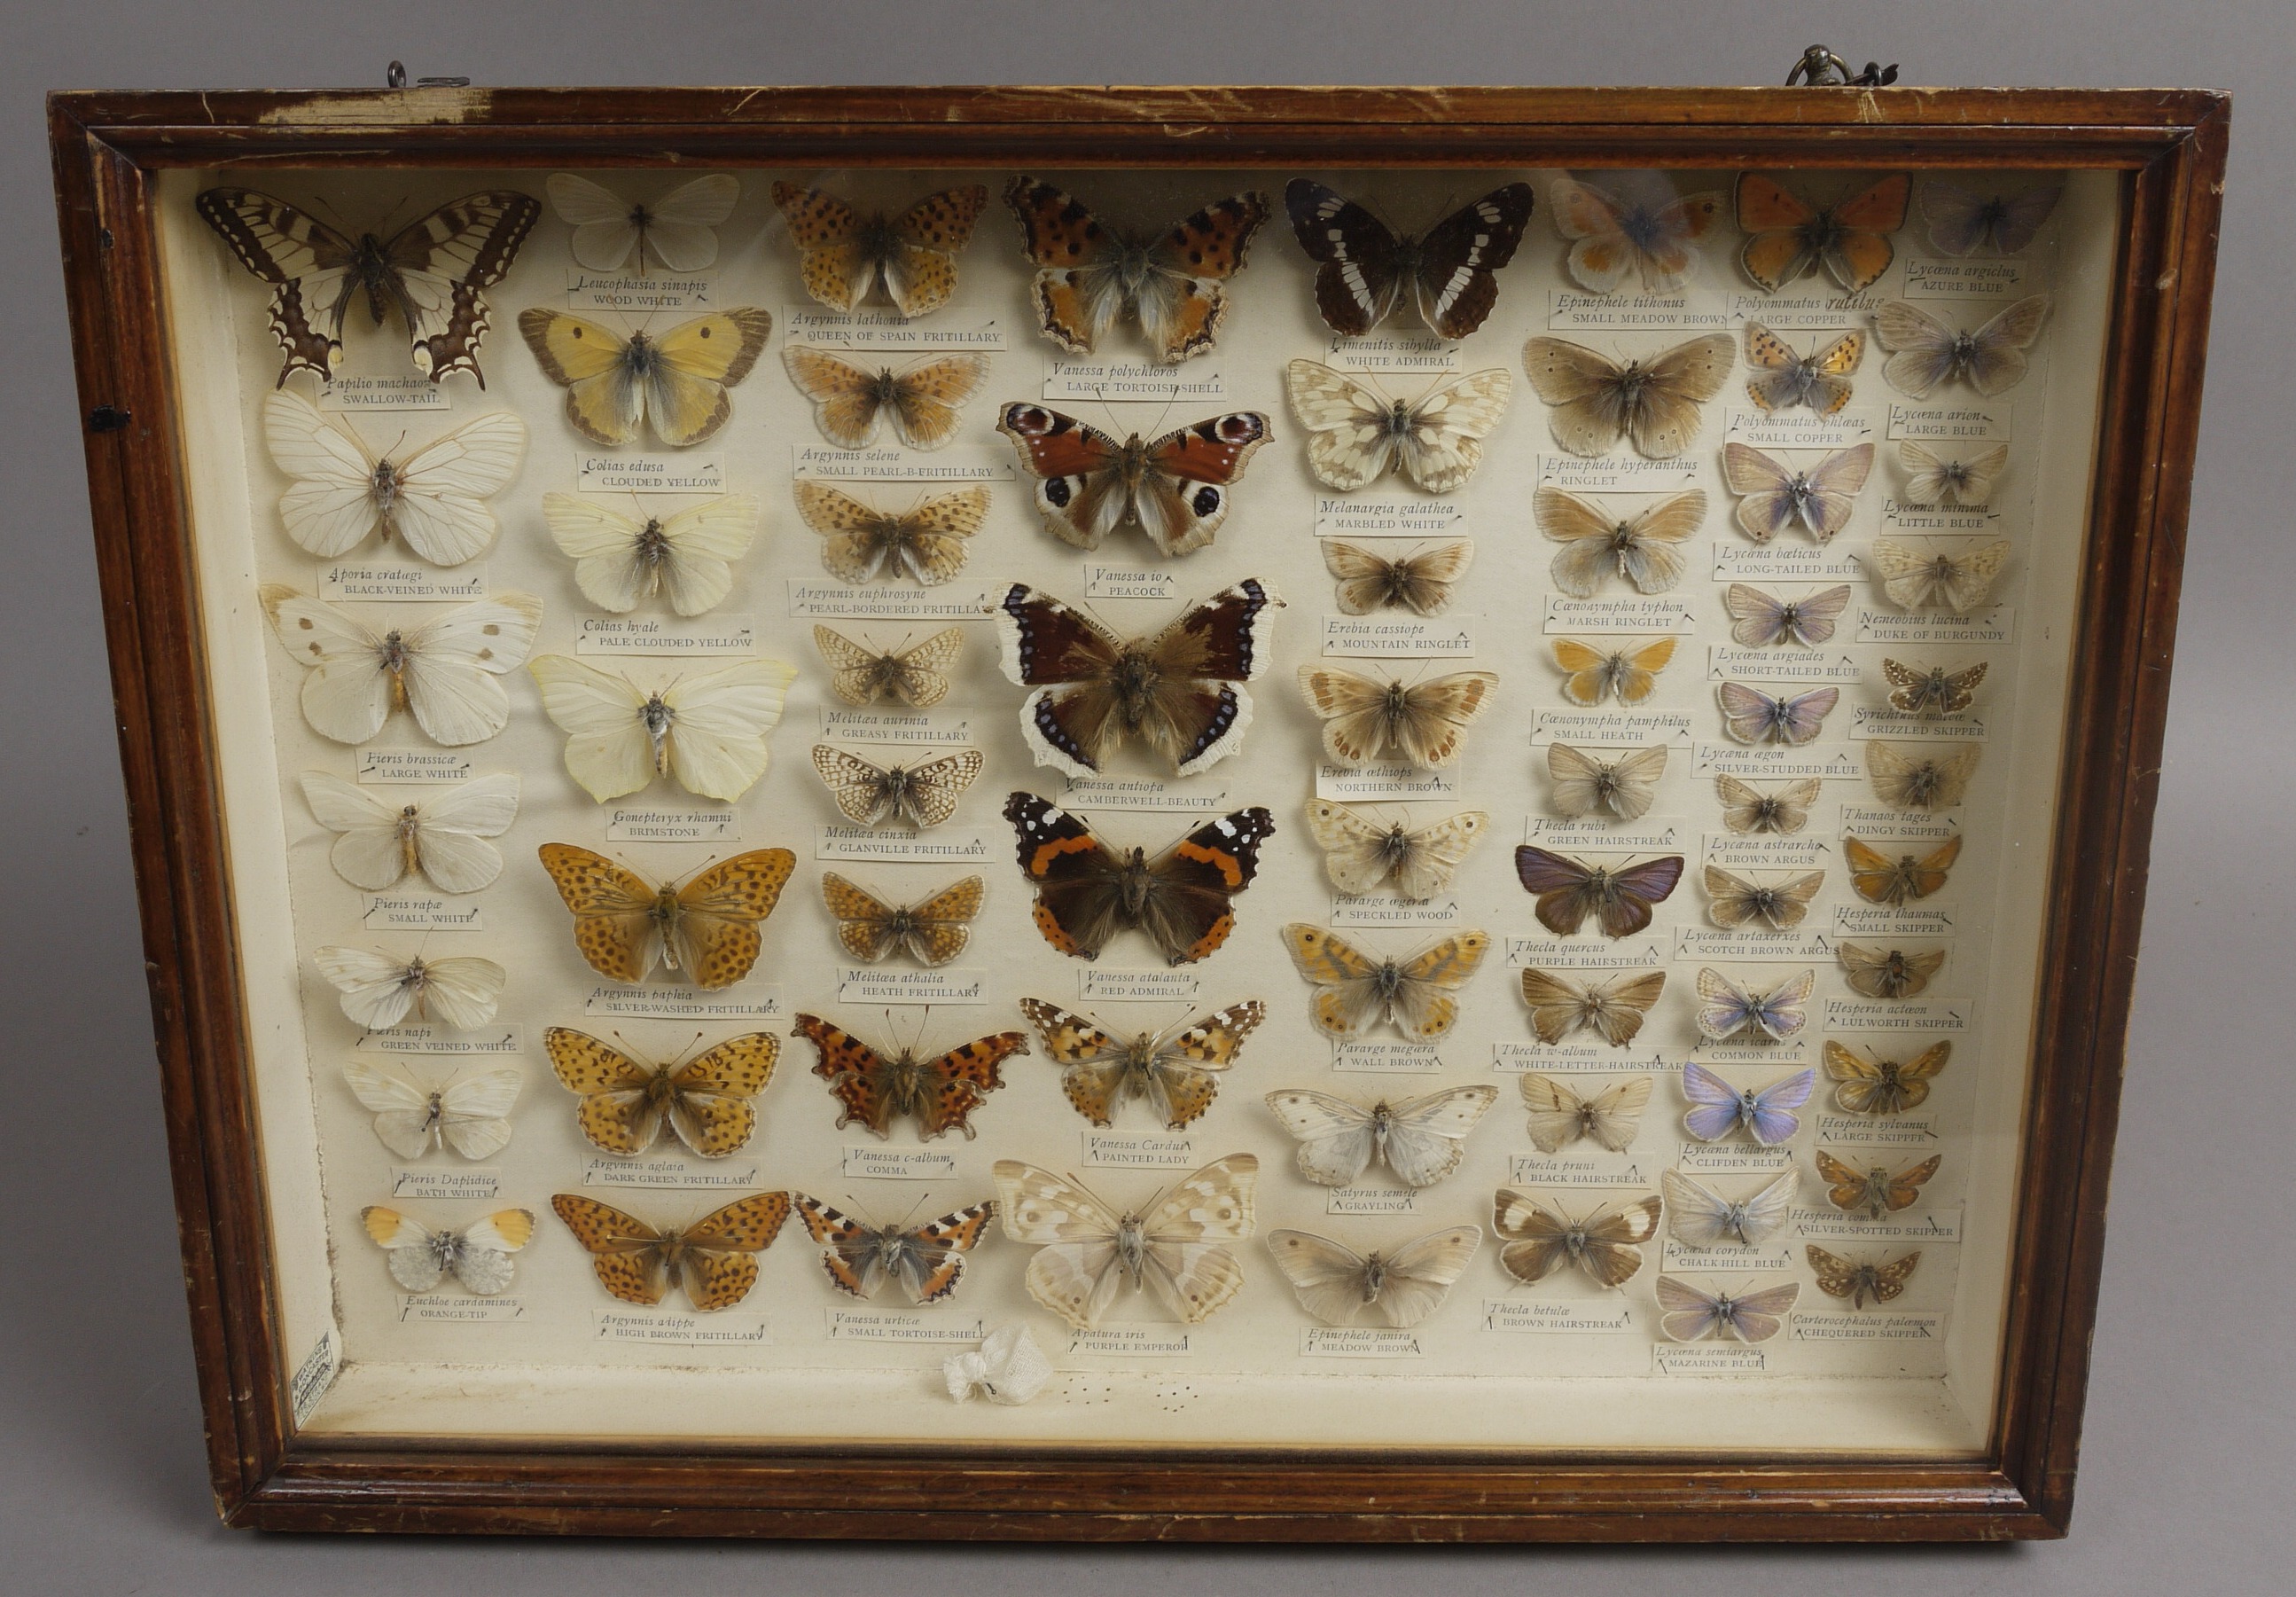 AN EARLY 20TH CENTURY DISPLAY OF INDIGENOUS BRITISH BUTTERFLIES, by Watkins & Doncaster, London,